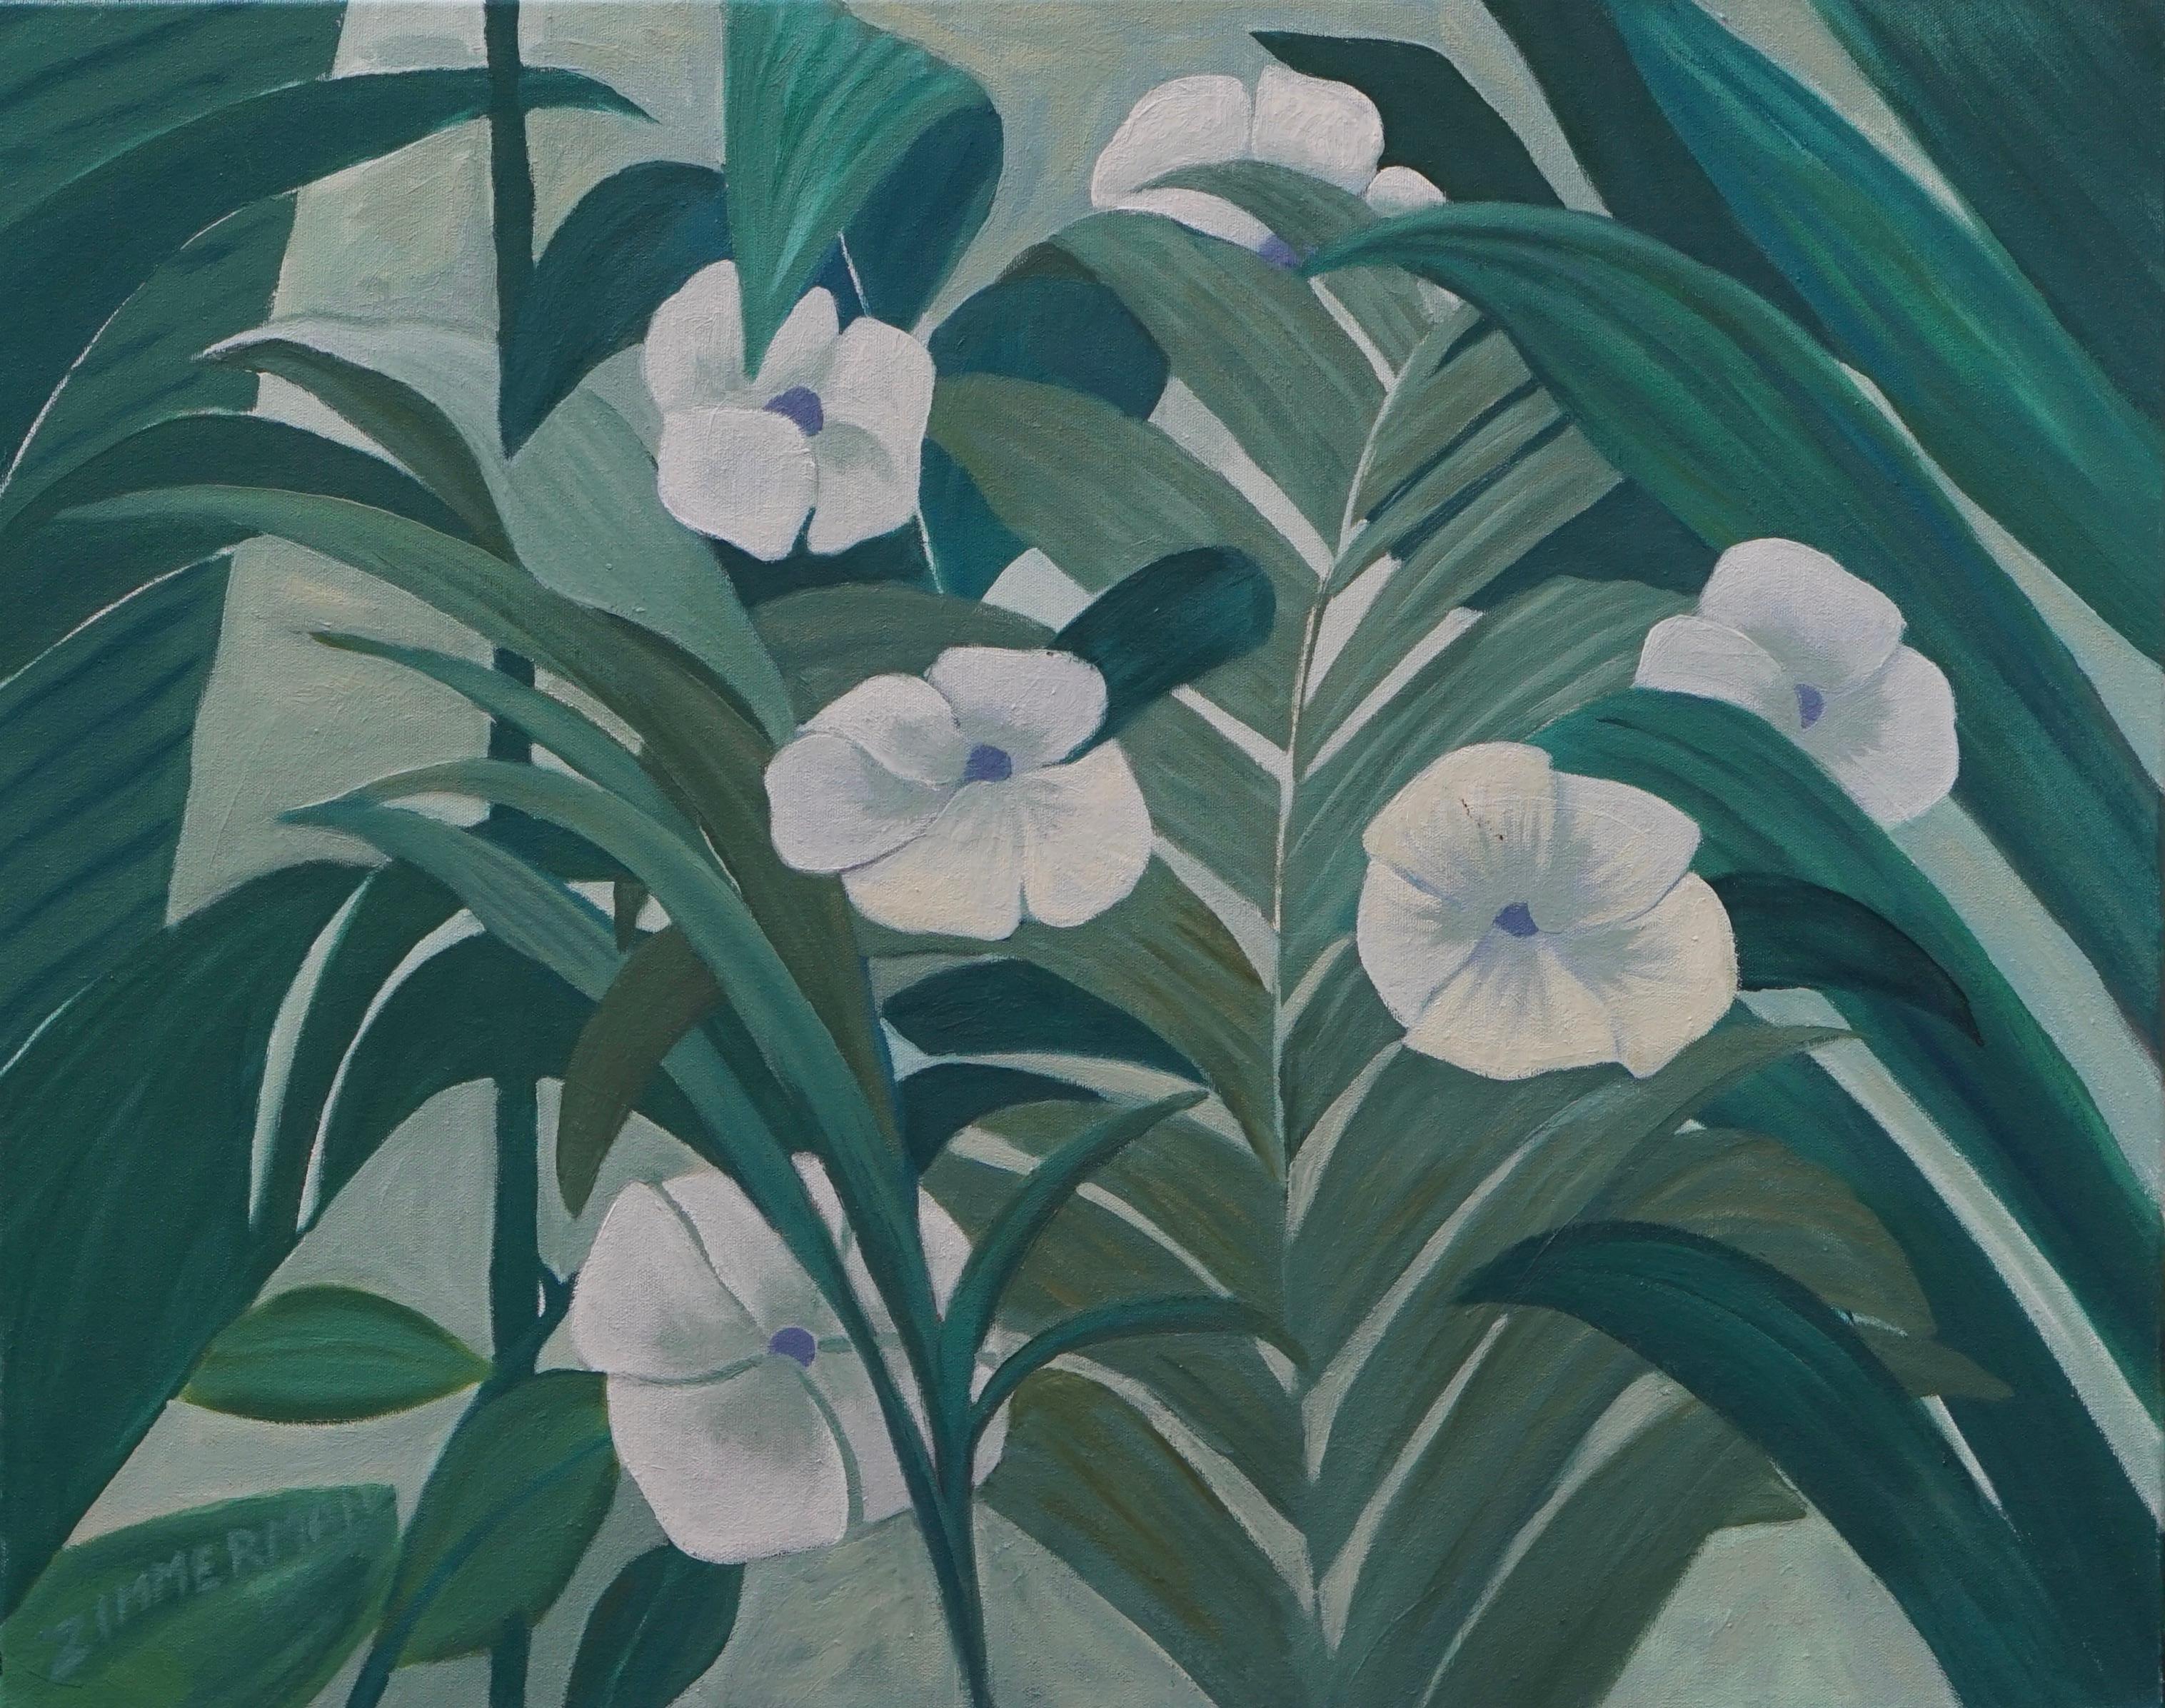 Harmony and color simplicity allow for an easy to live with work of art as white flowers dance amongst the palmettos.

Symphony in Soft Green - Landscape Painting - Oil on Canvas By Marc Zimmerman

This masterpiece is exhibited in the Zimmerman